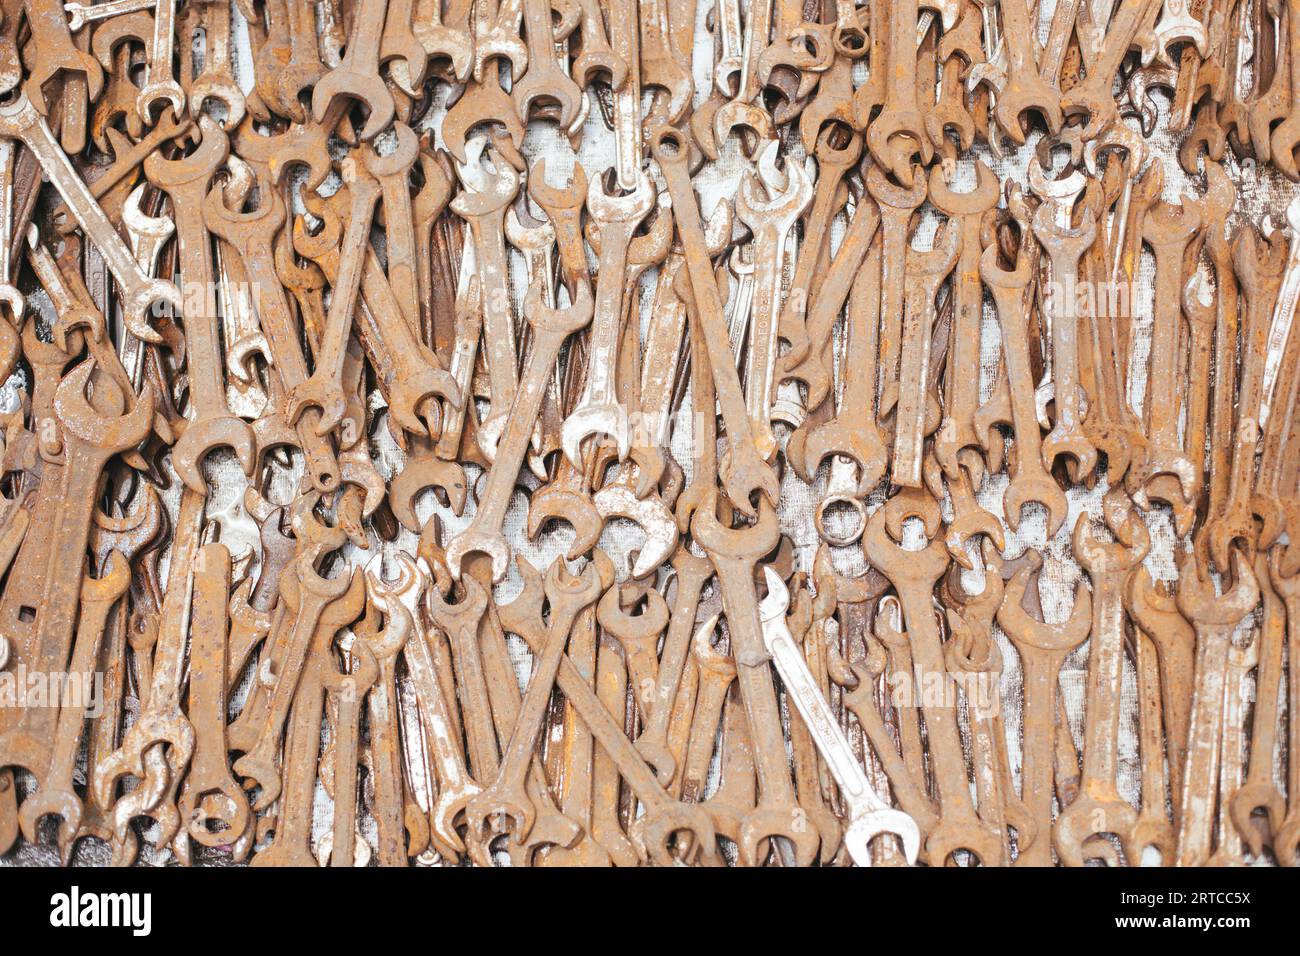 Pune, India, old rusted wrenches for sale Stock Photo